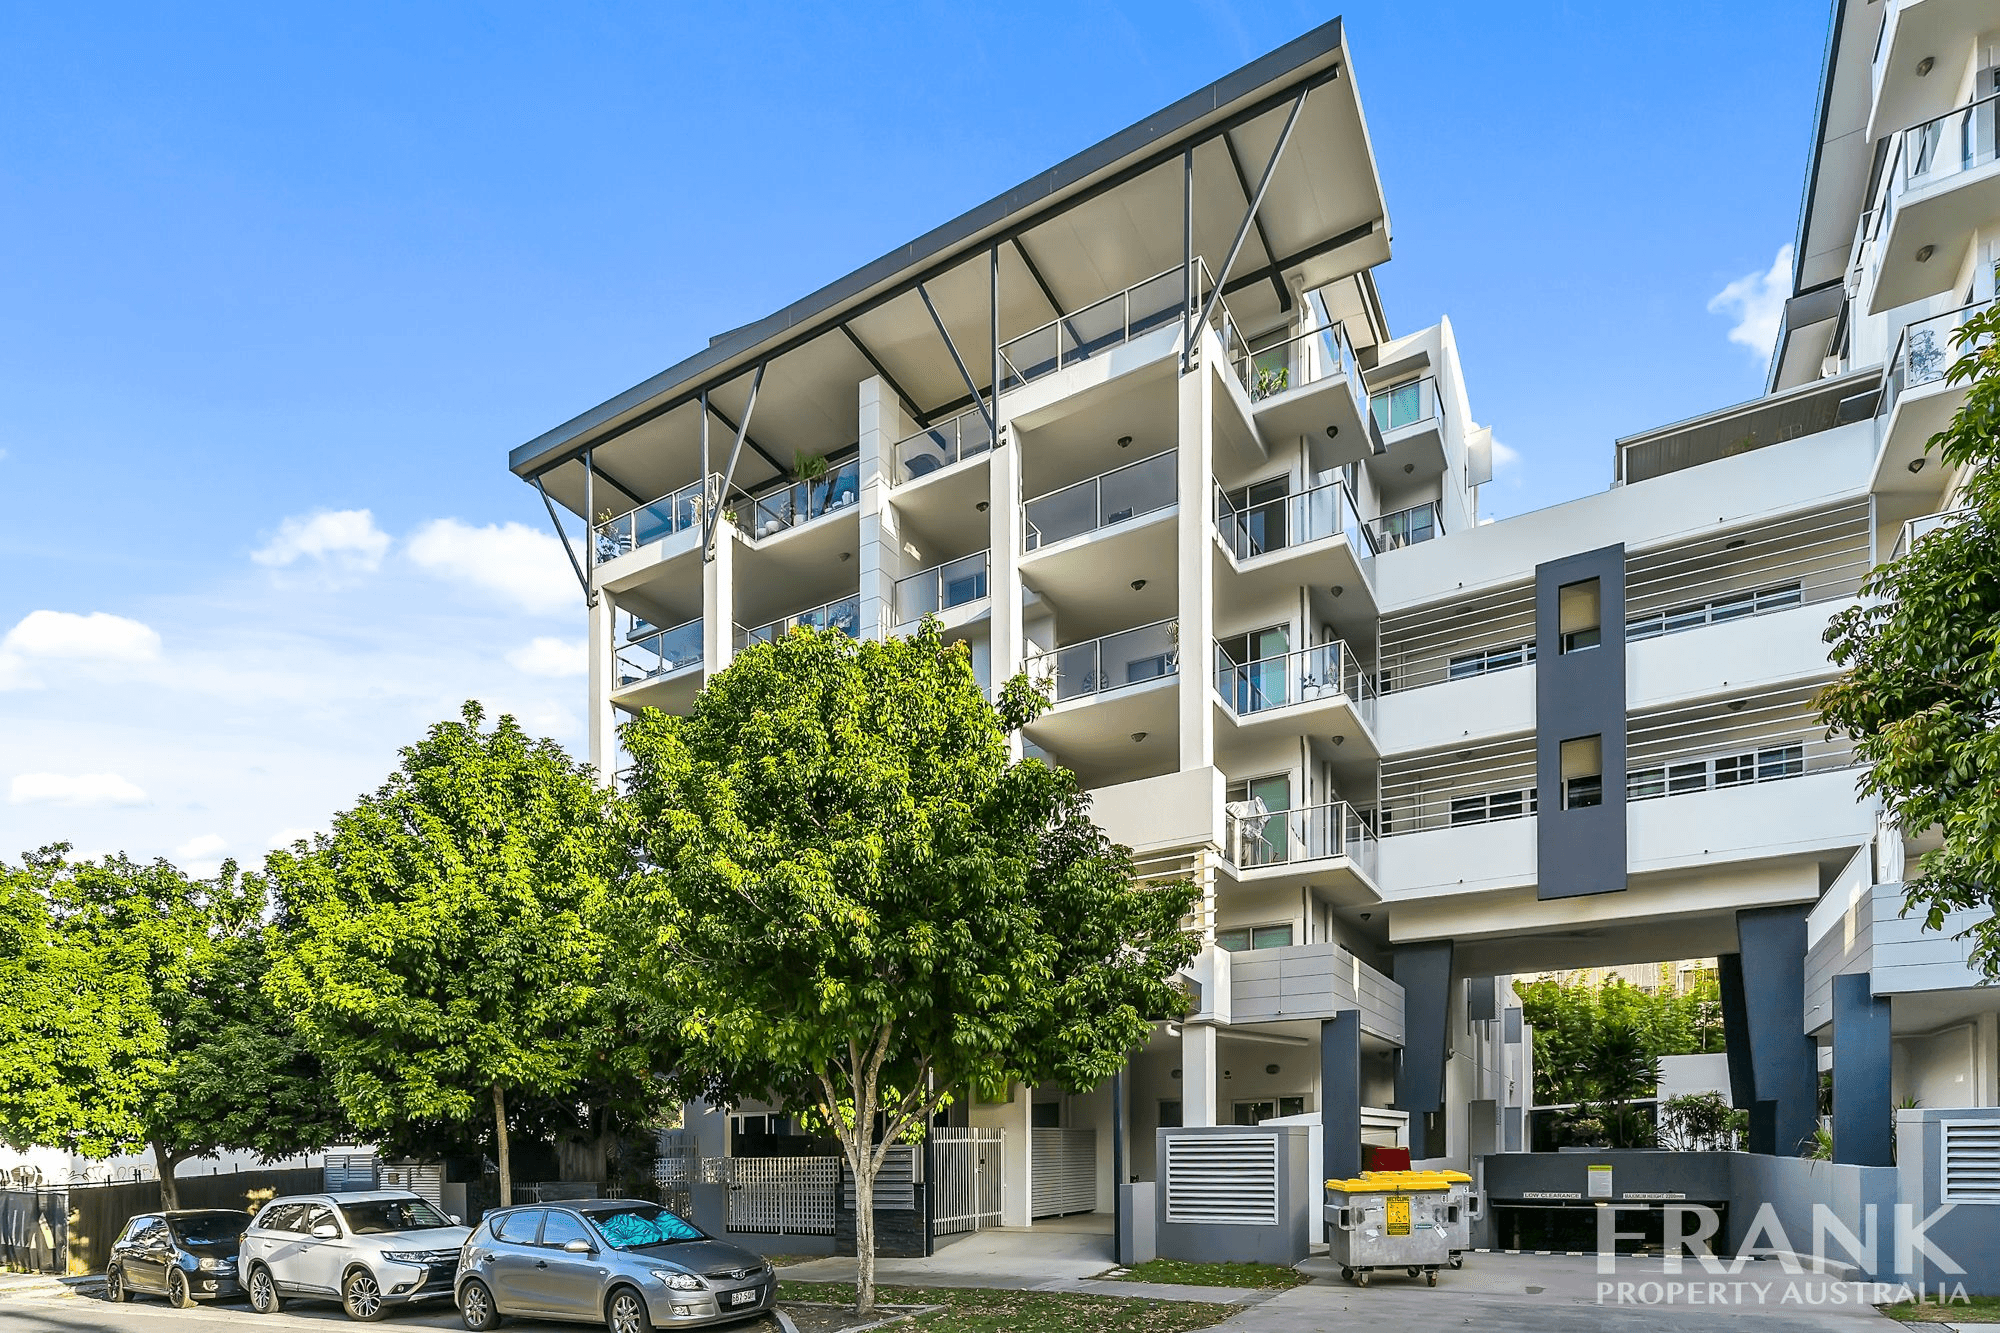 Ground Floor/28 Ferry Road, West End, Qld 4101